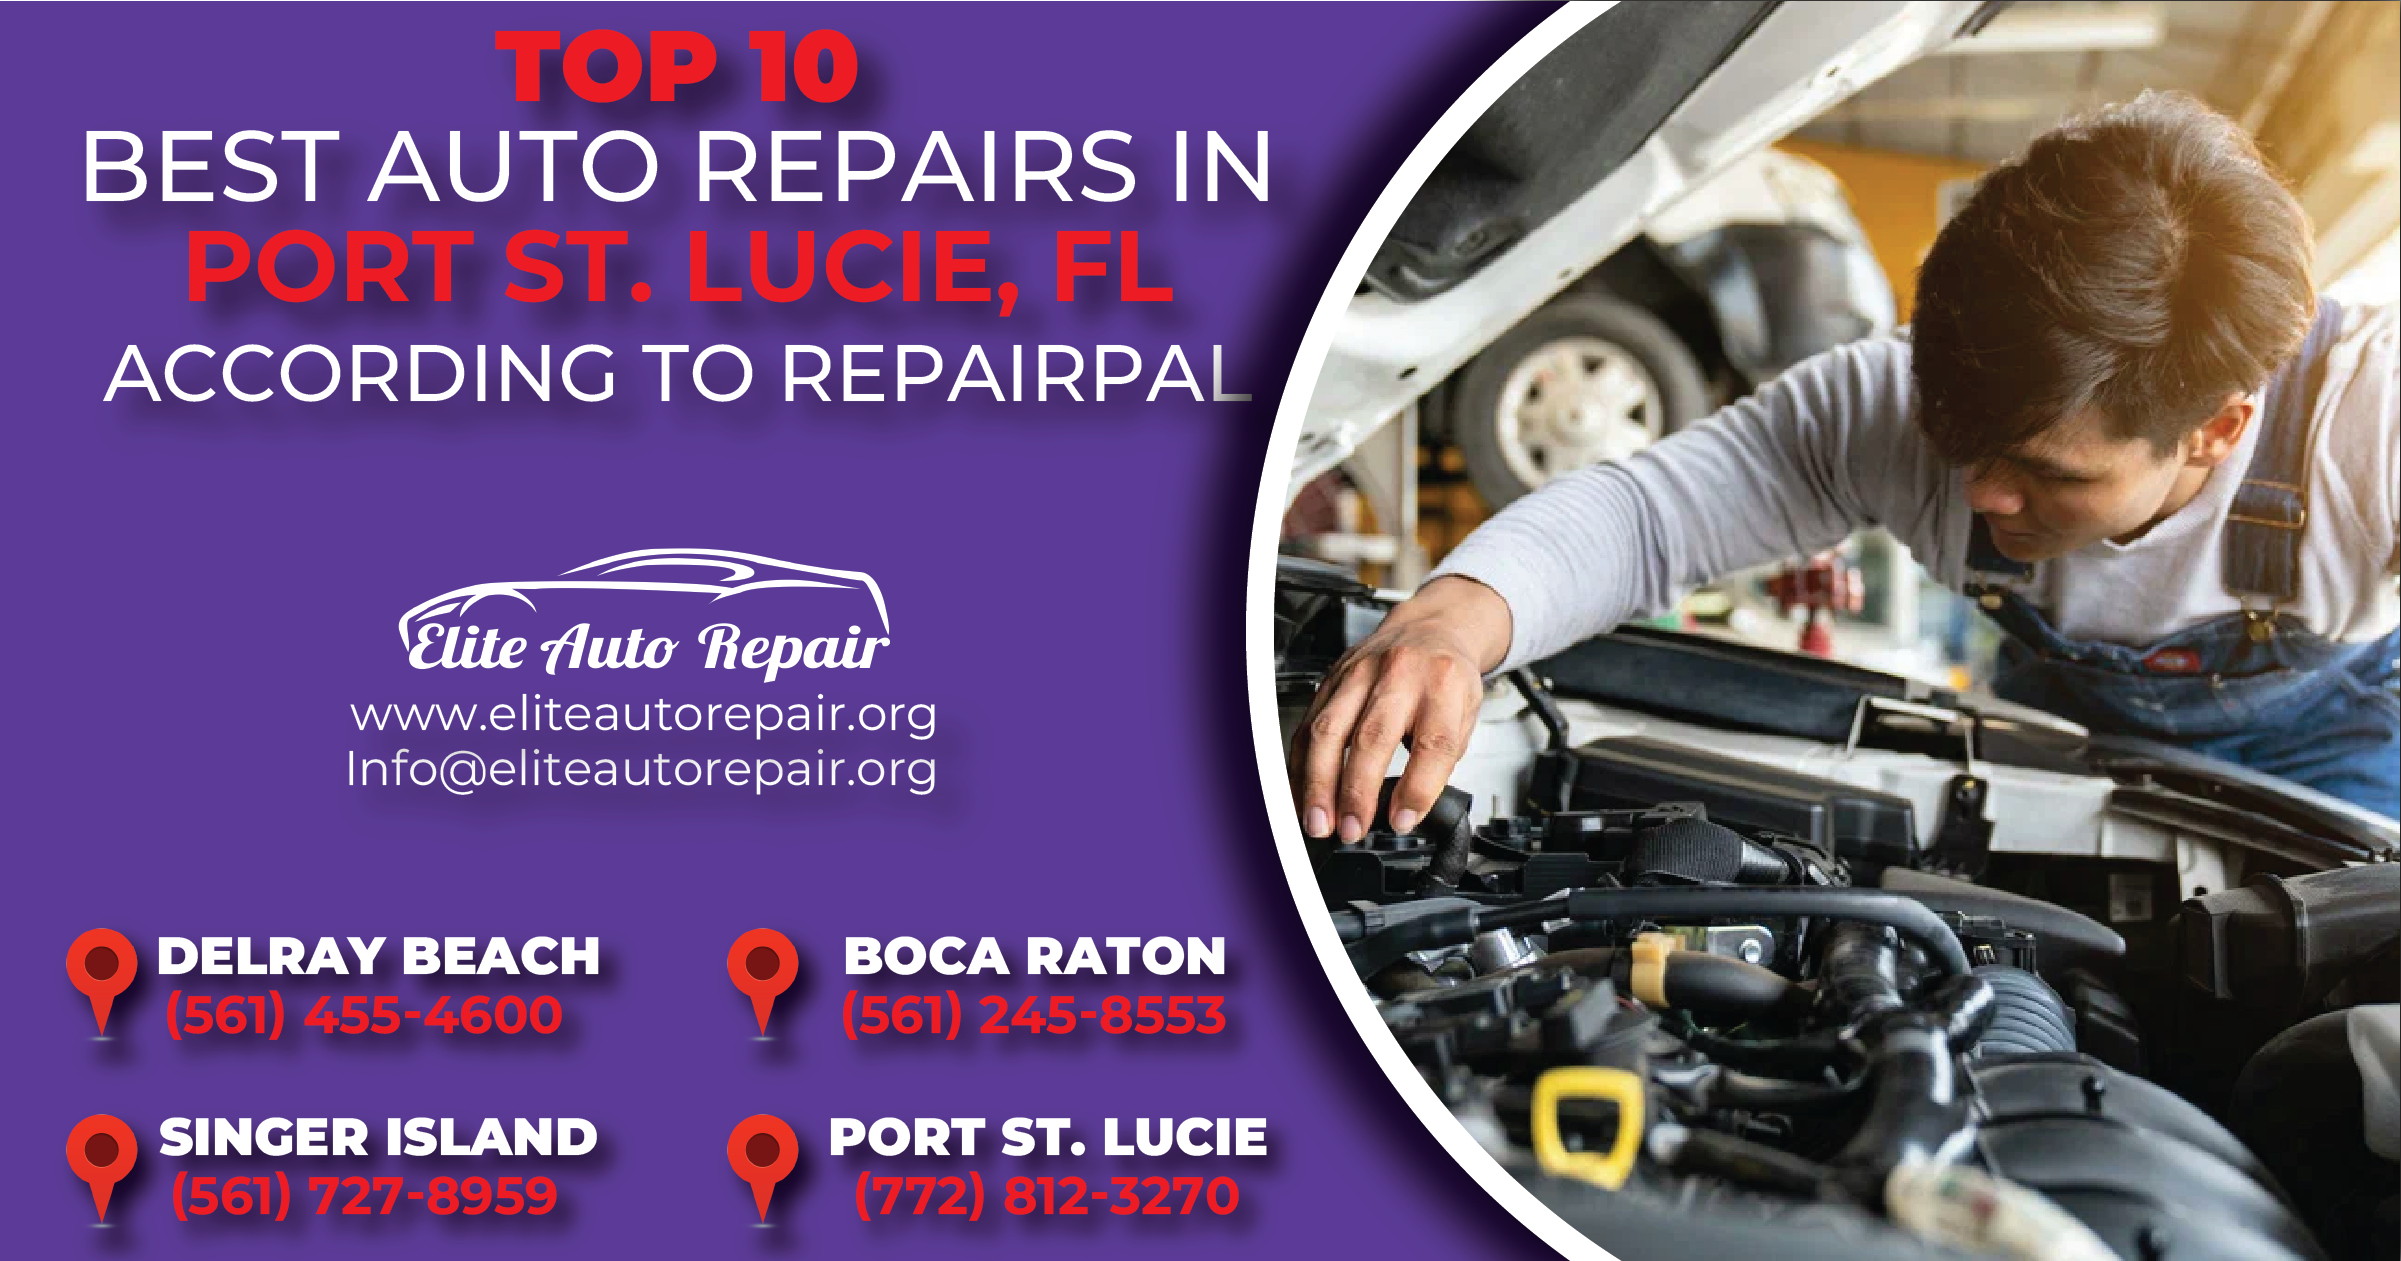 Top 10 Best Auto Repairs in Port St. Lucie Florida – According to Repairpal